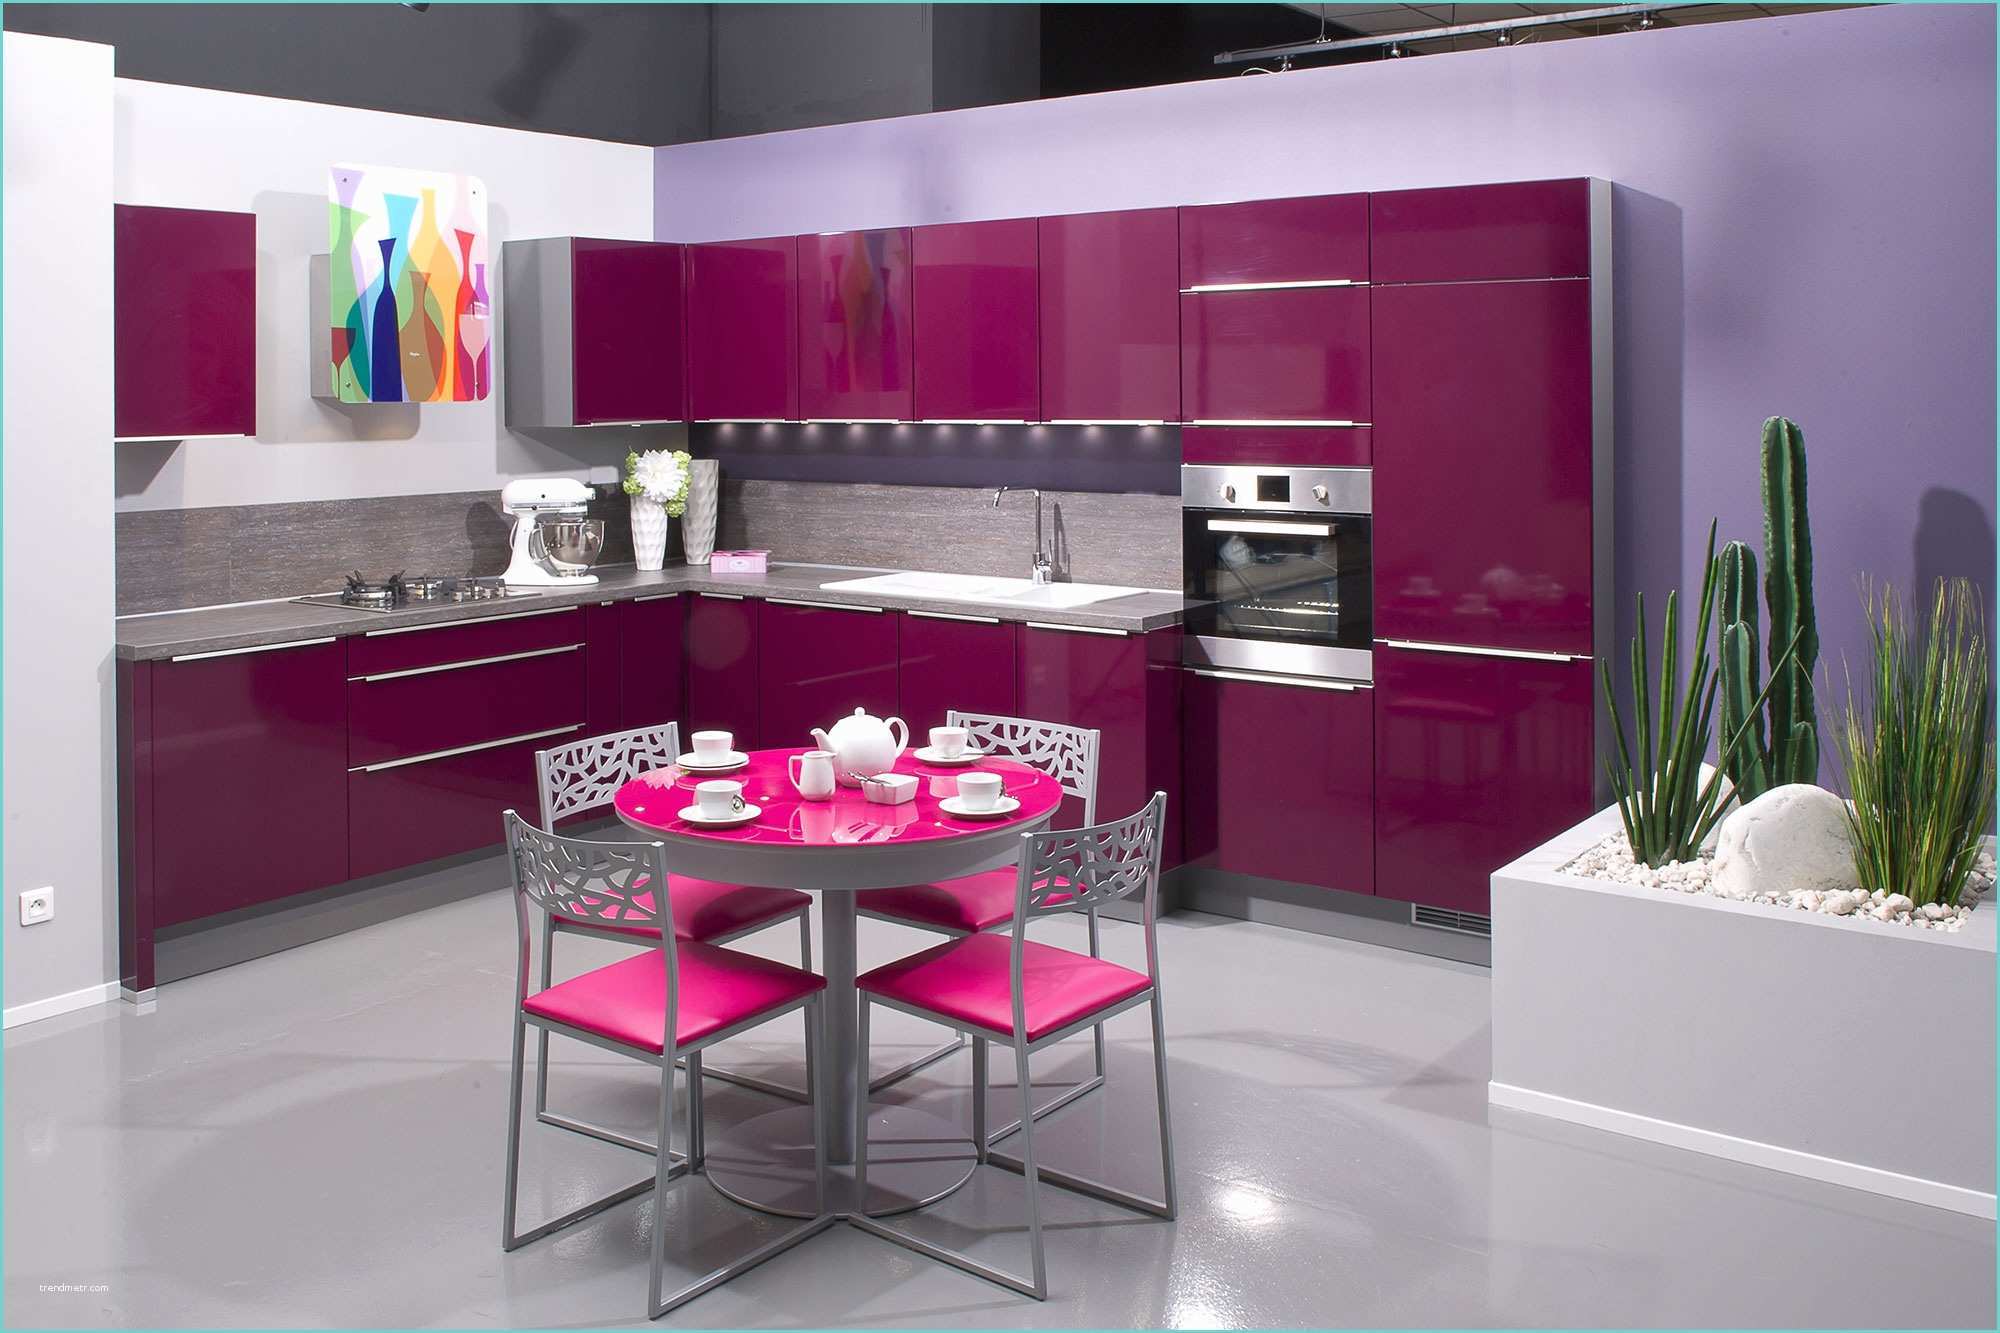 Meuble De Cuisine Prune Lacquered Kitchen Cabinets Zyinga Cuisine Girly Home